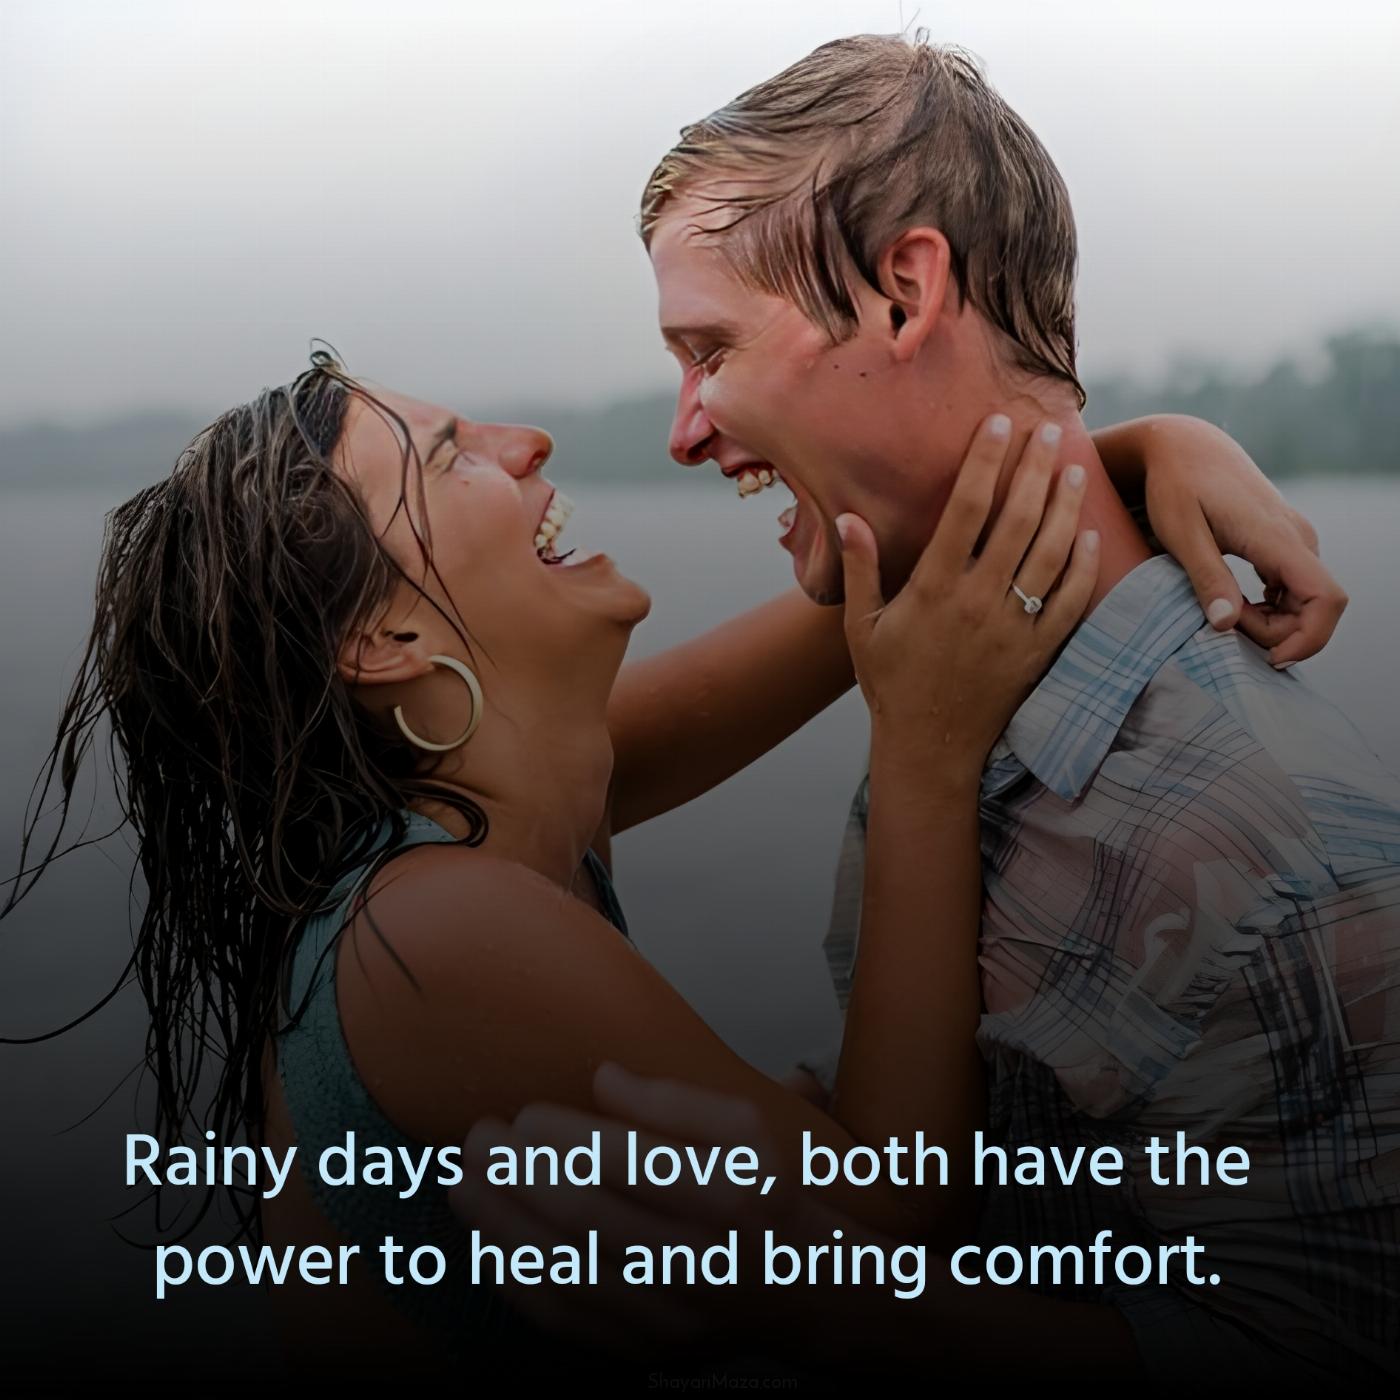 Rainy days and love both have the power to heal